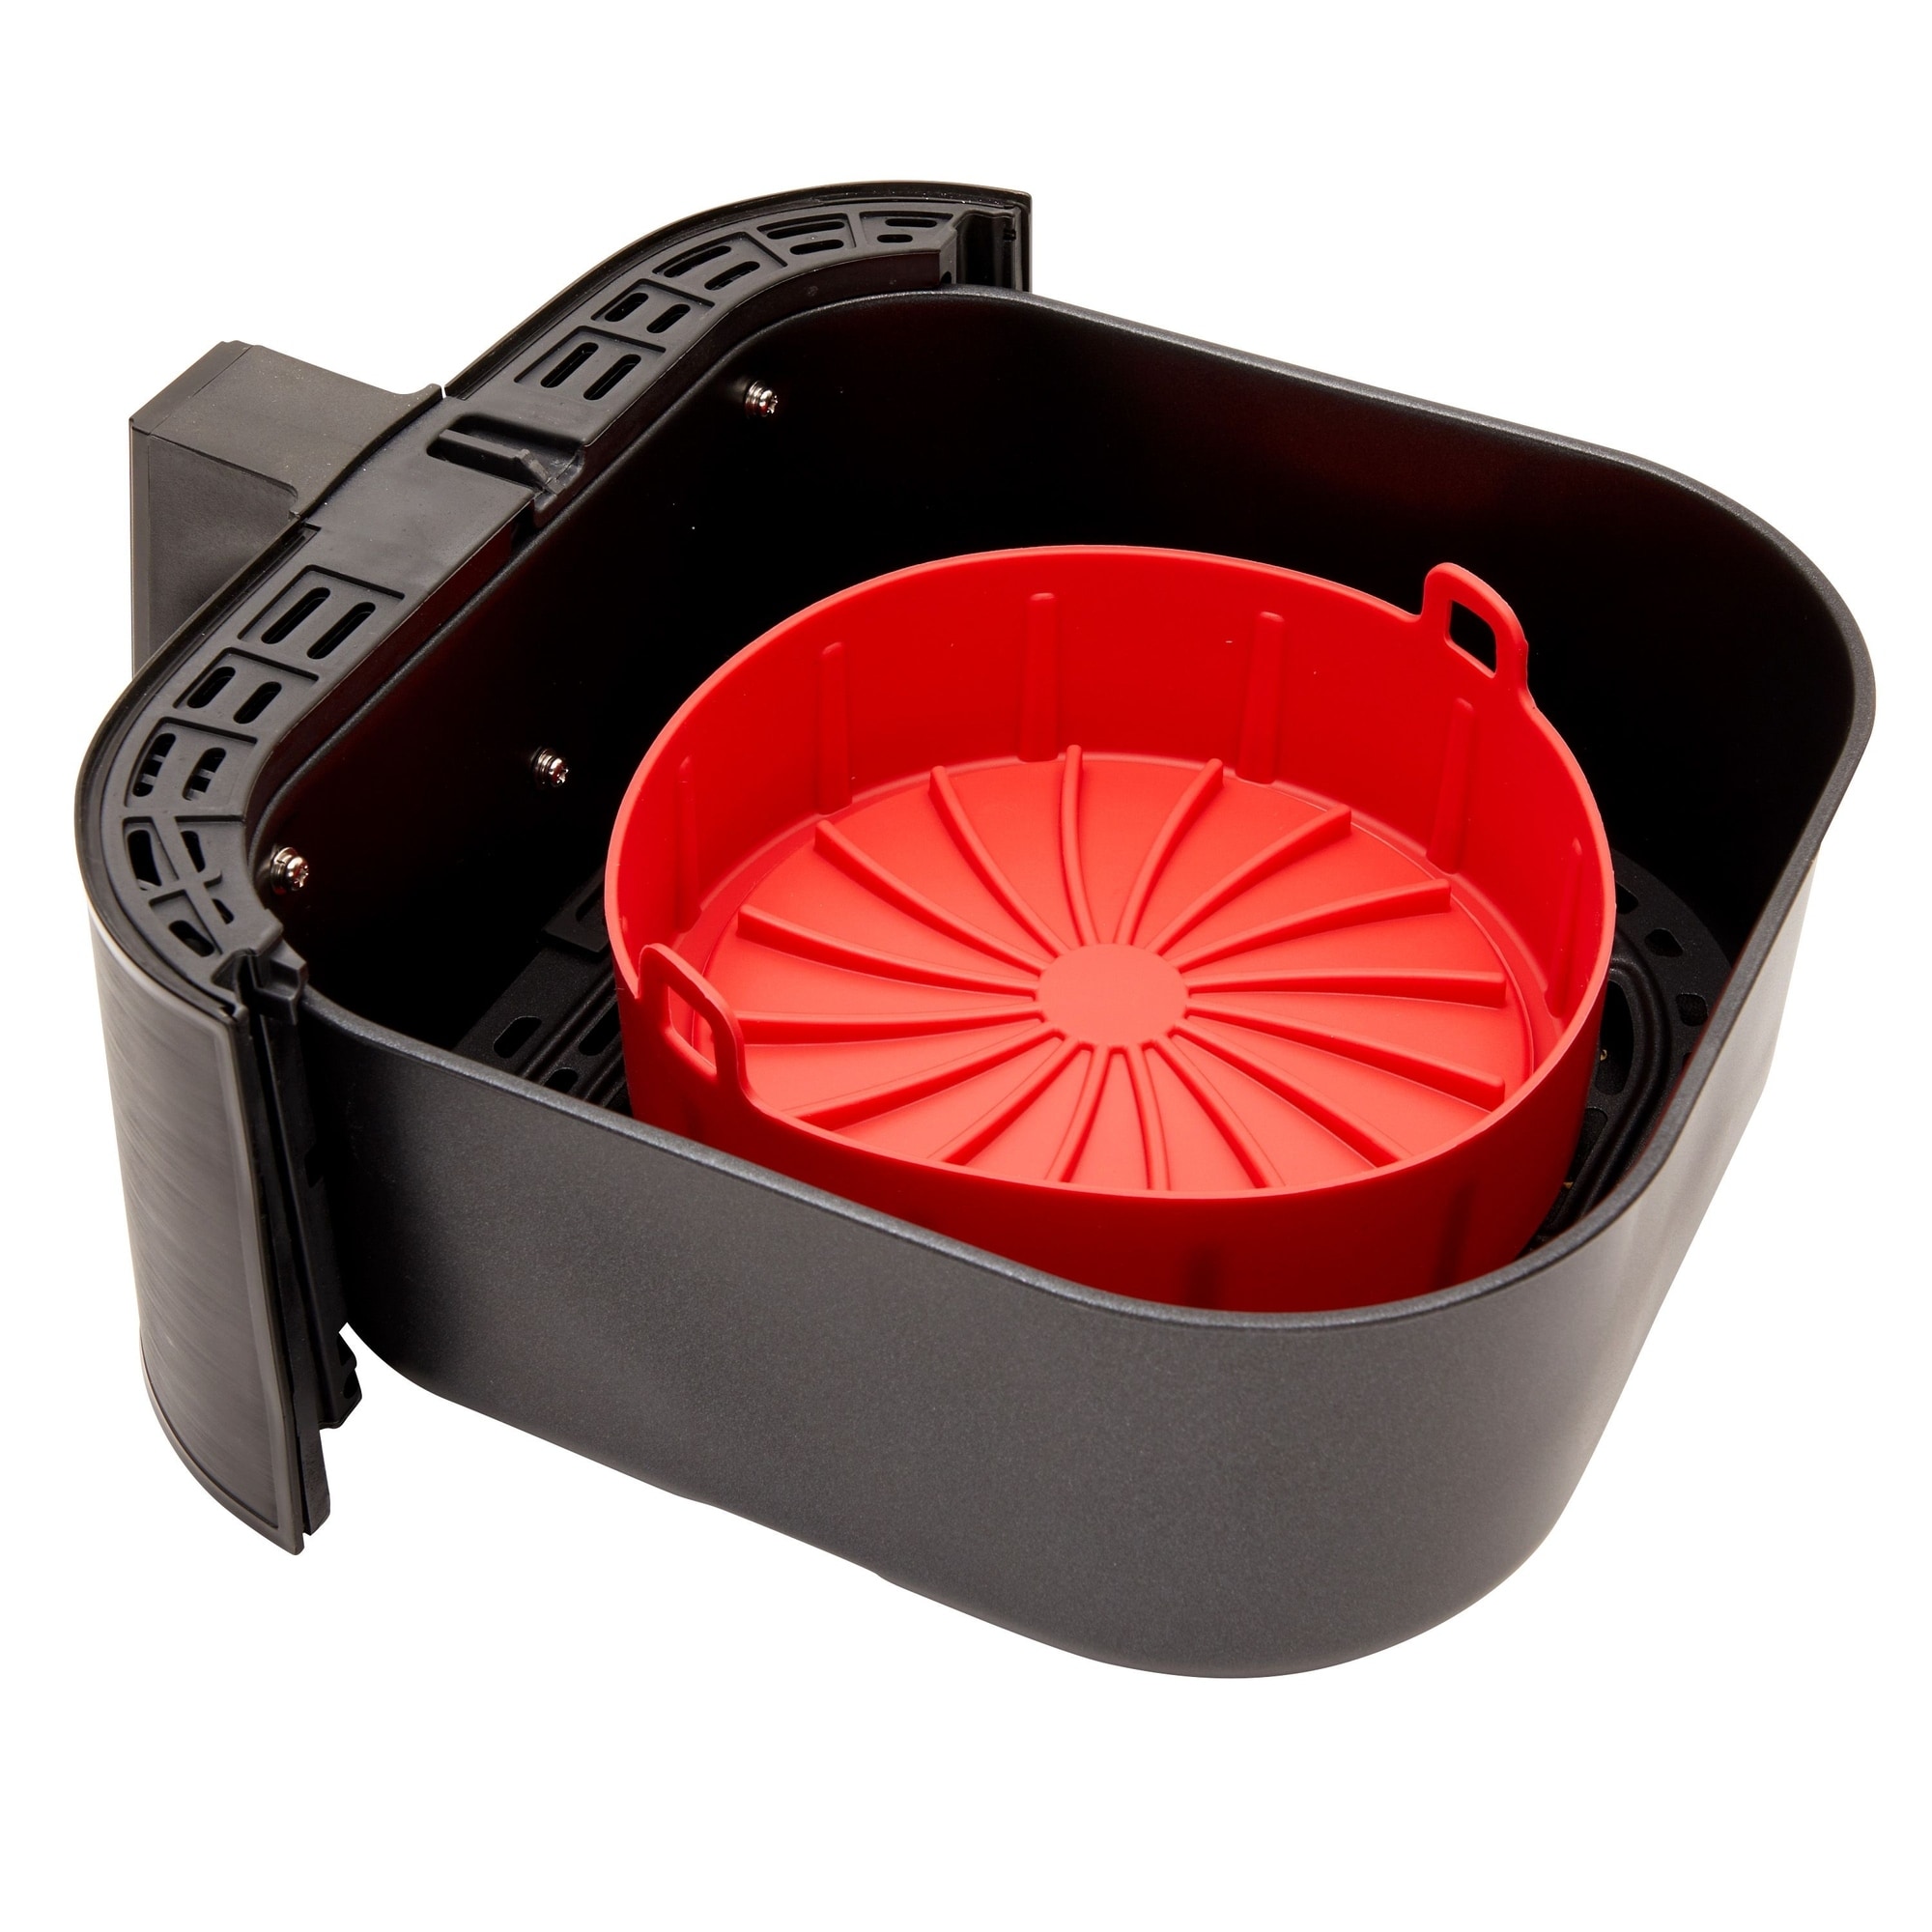 https://ak1.ostkcdn.com/images/products/is/images/direct/2113a7f5debe25da7c185854e1e74eb4fc70a925/4-Piece-Set-Silicone-Pot-Basket-with-Handles%2C-Brush%2C-Tongs-for-Air-Fryer-Liner-%287.5-In%2C-Red%29.jpg